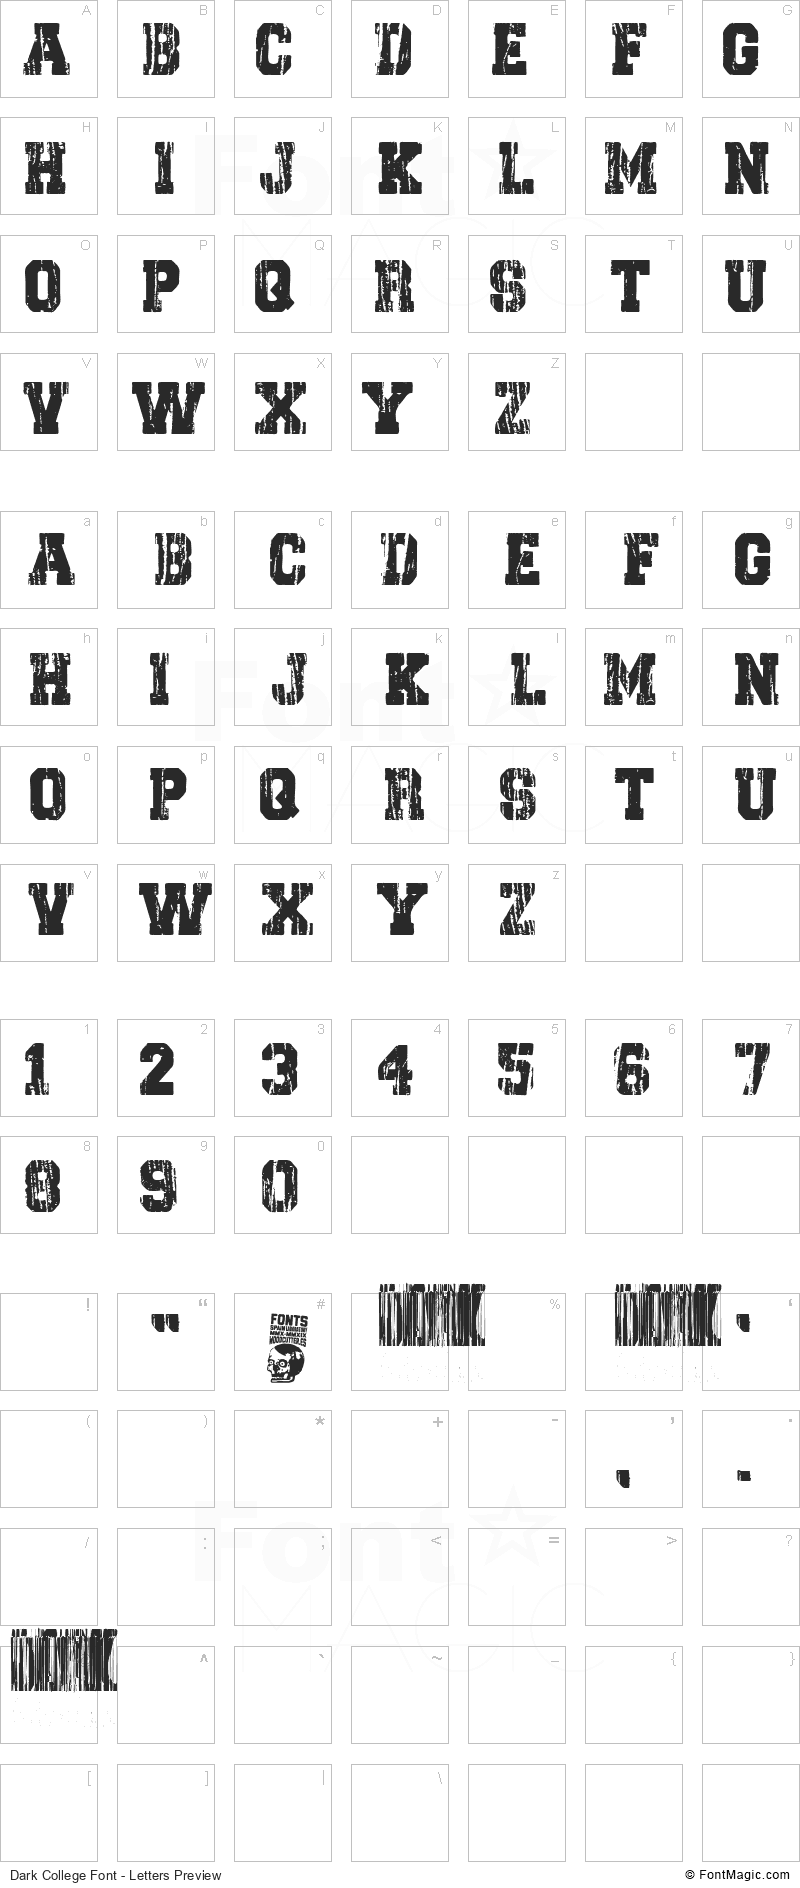 Dark College Font - All Latters Preview Chart